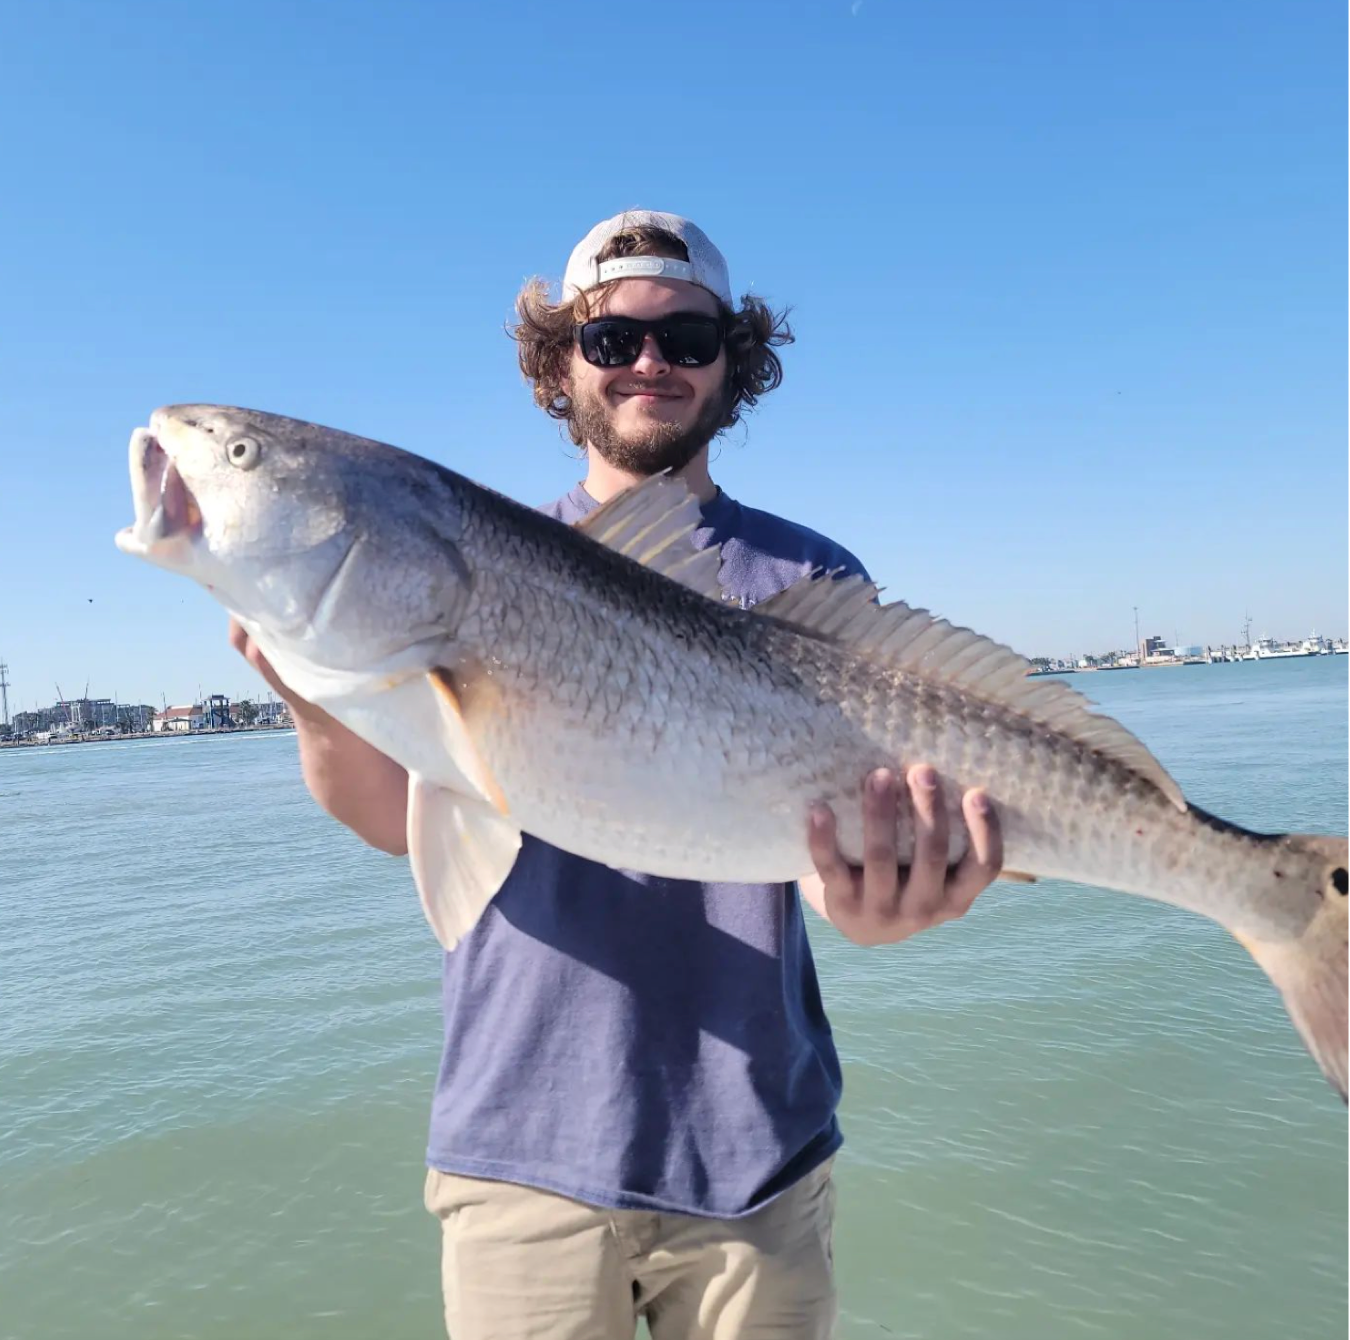 Affordable Guide Service Fishing Charter in Corpus Christi | 5-Hour Trip fishing Inshore